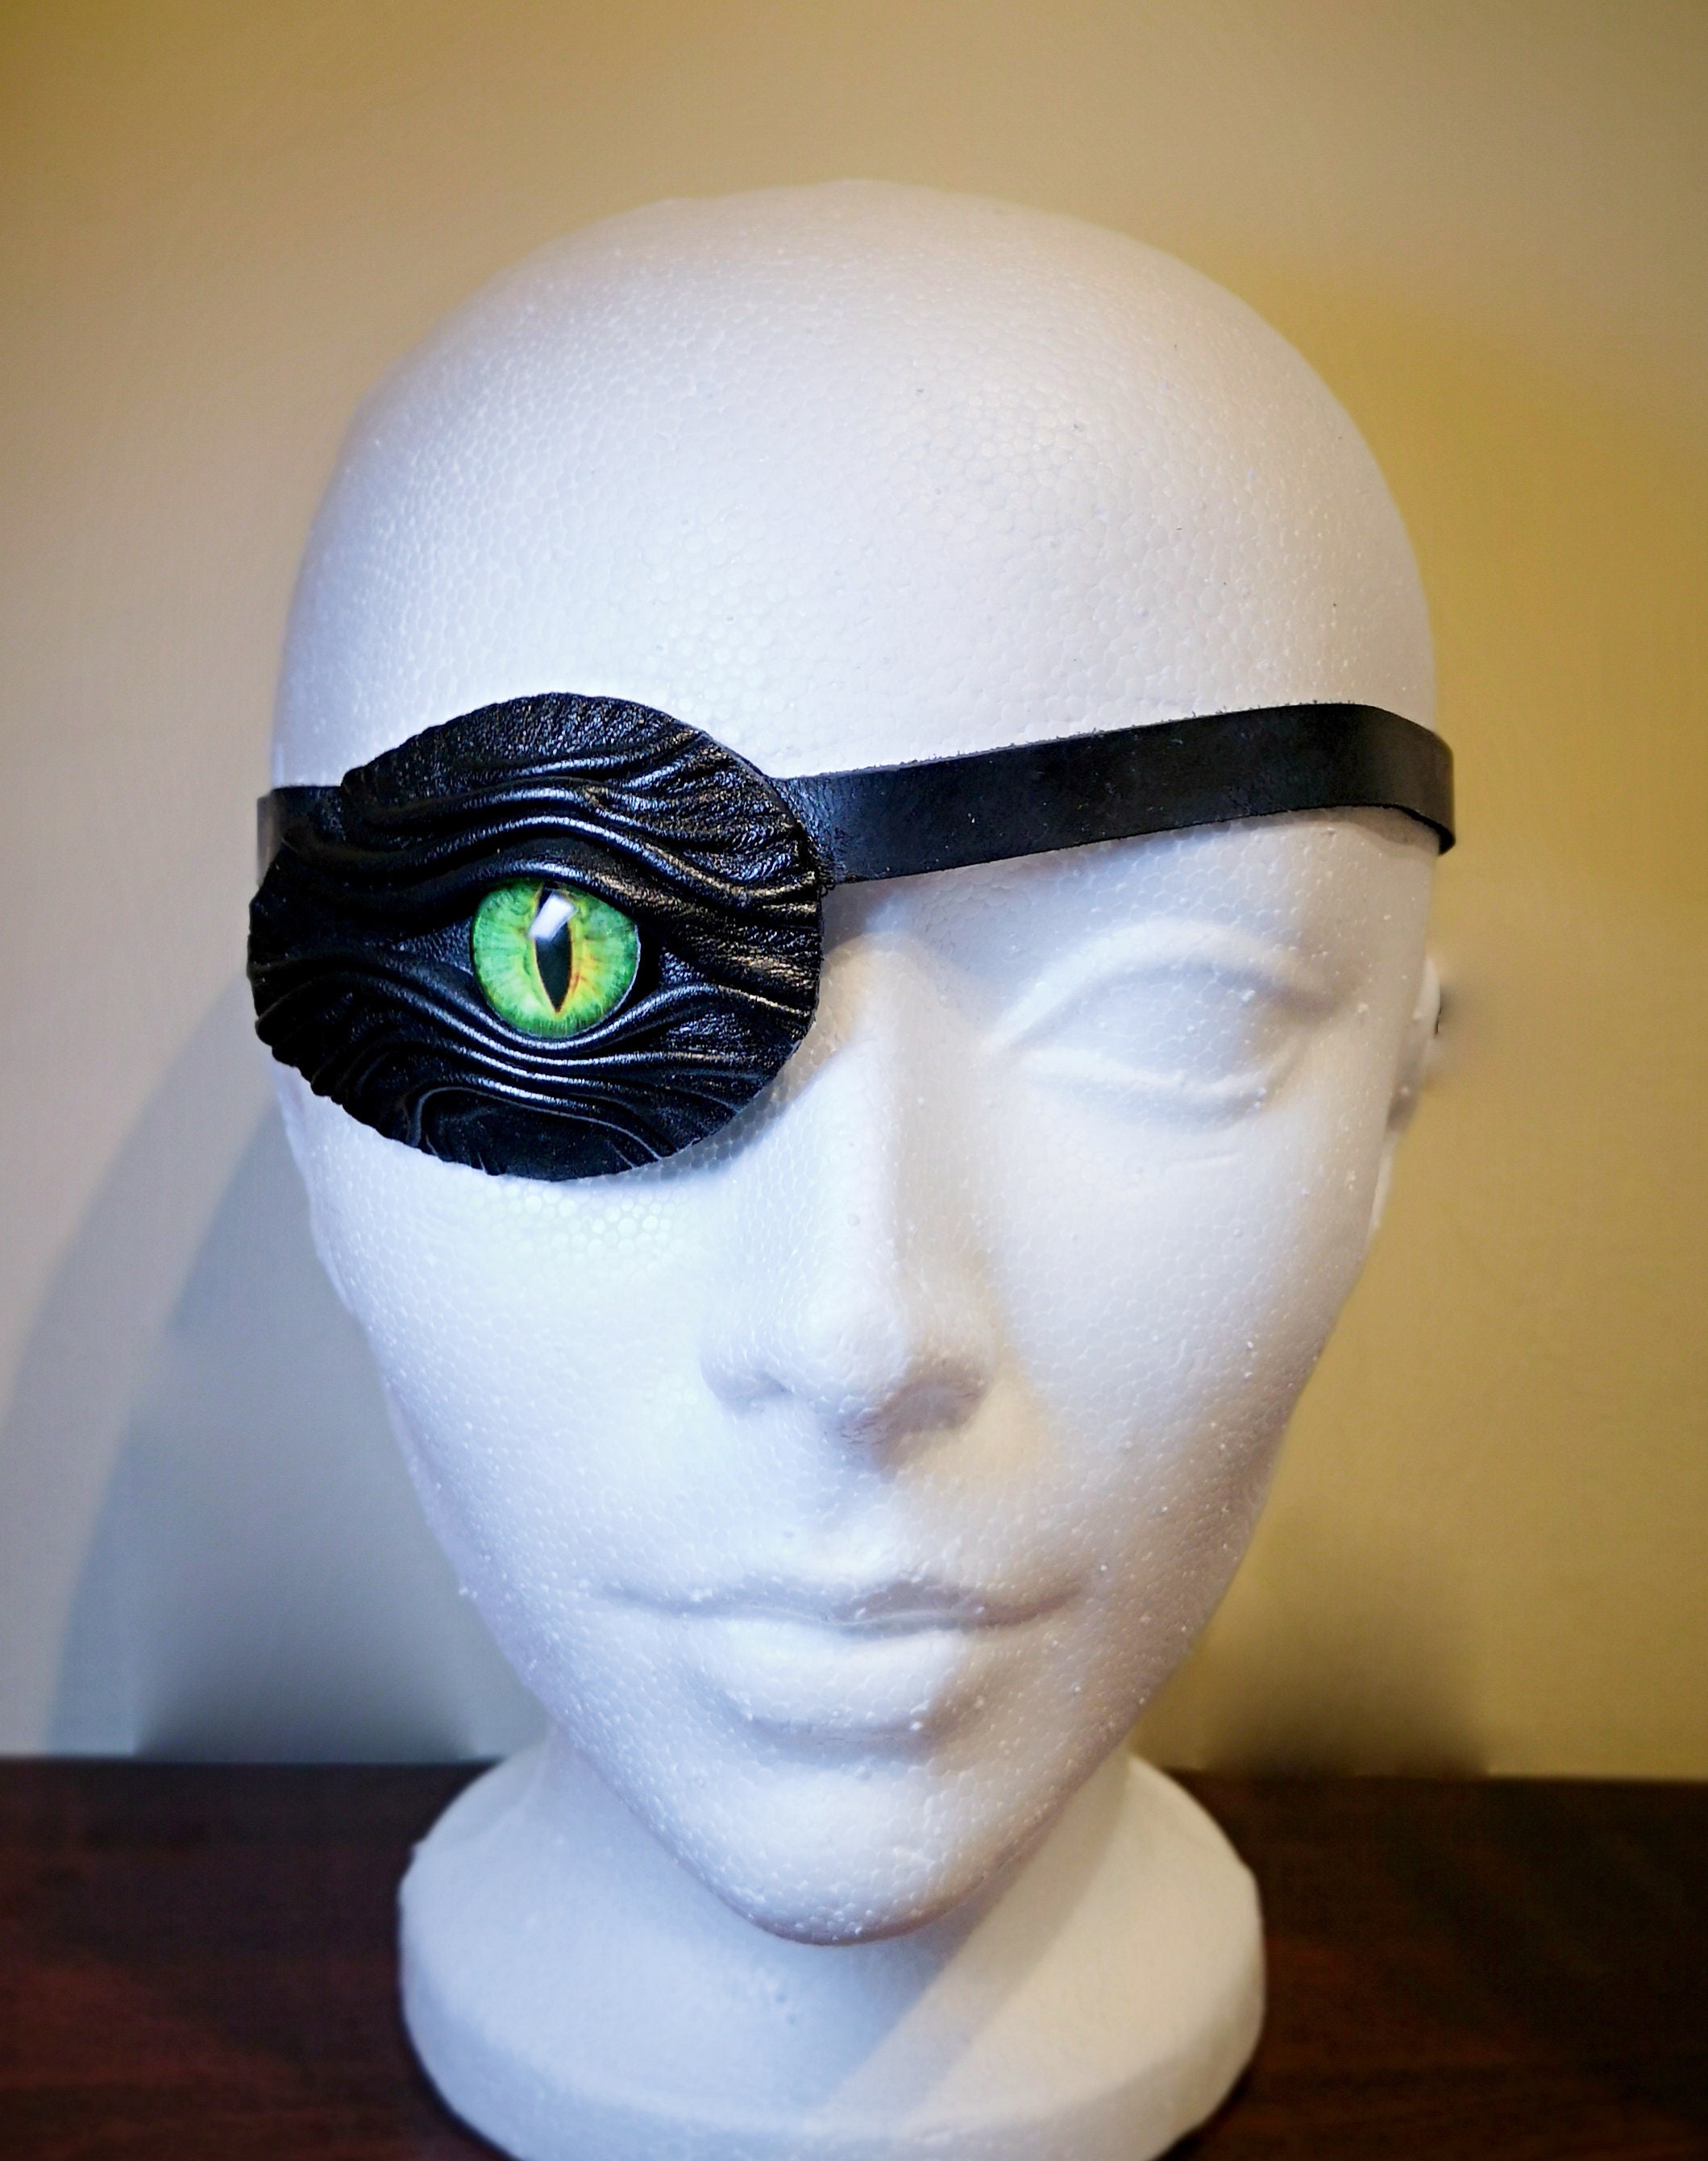 Handmade Black Snake Skin Leather Eye Patch with Buckle. Medical,  Adjustable, Cosplay, Halloween. Suitable for permanent use. For the Right  or Left